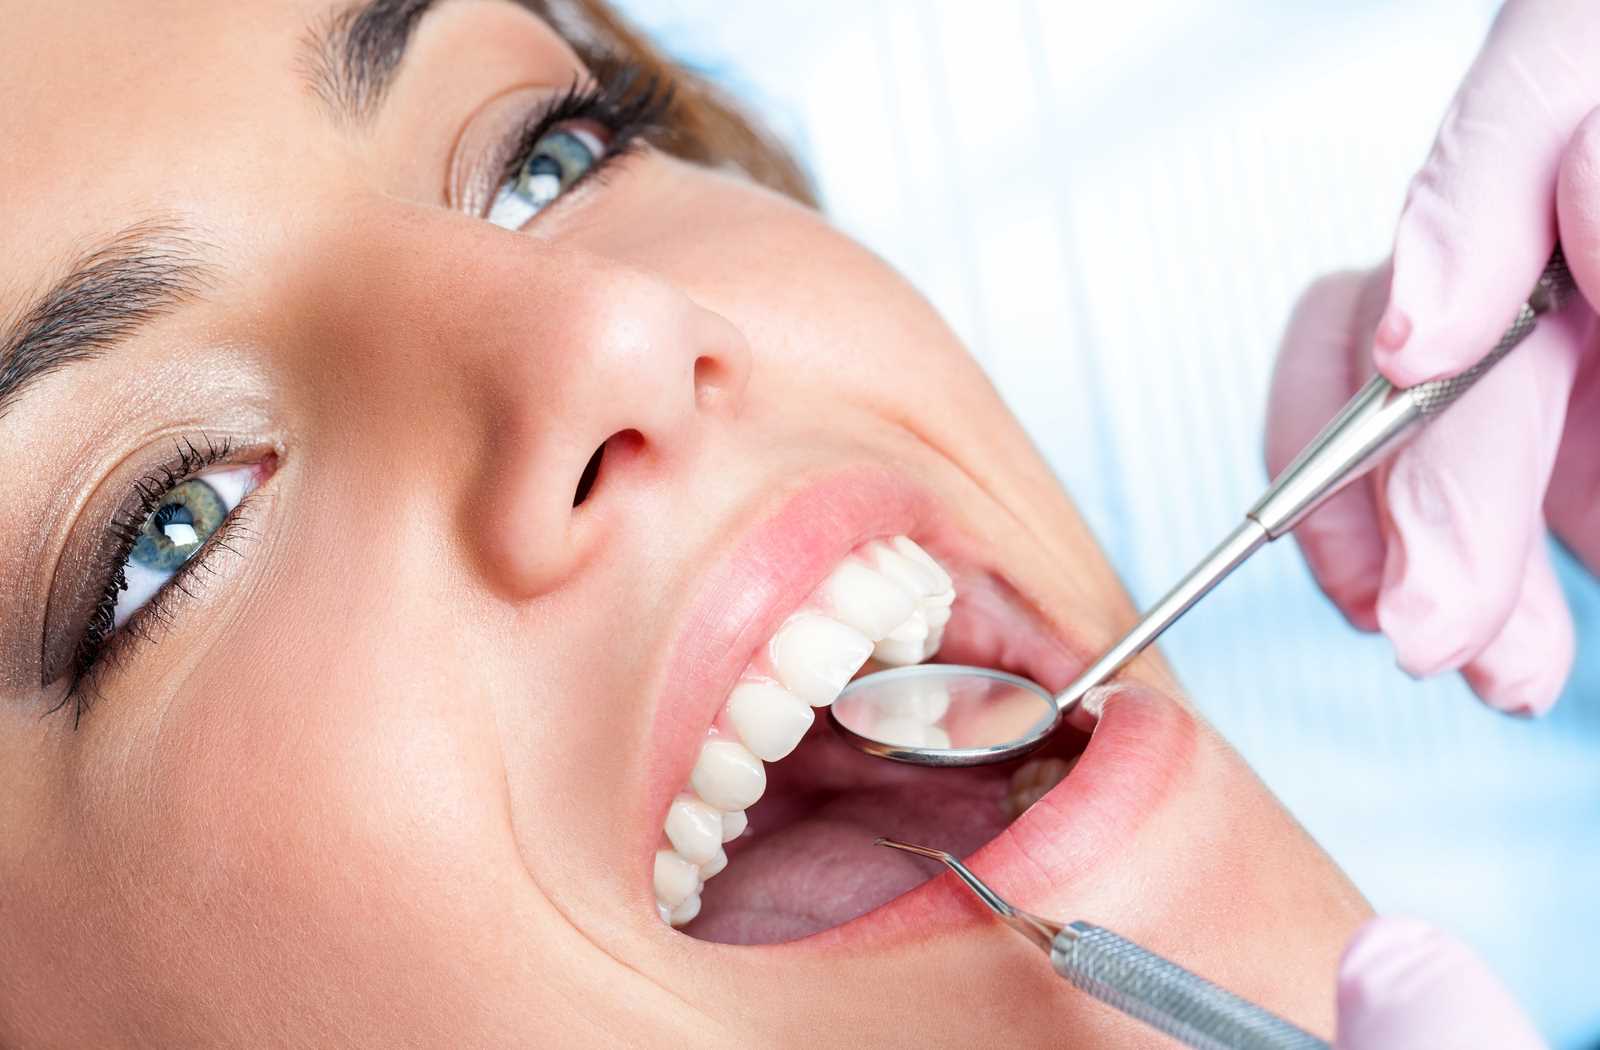 young woman enjoying dental exam in saturated white exposure